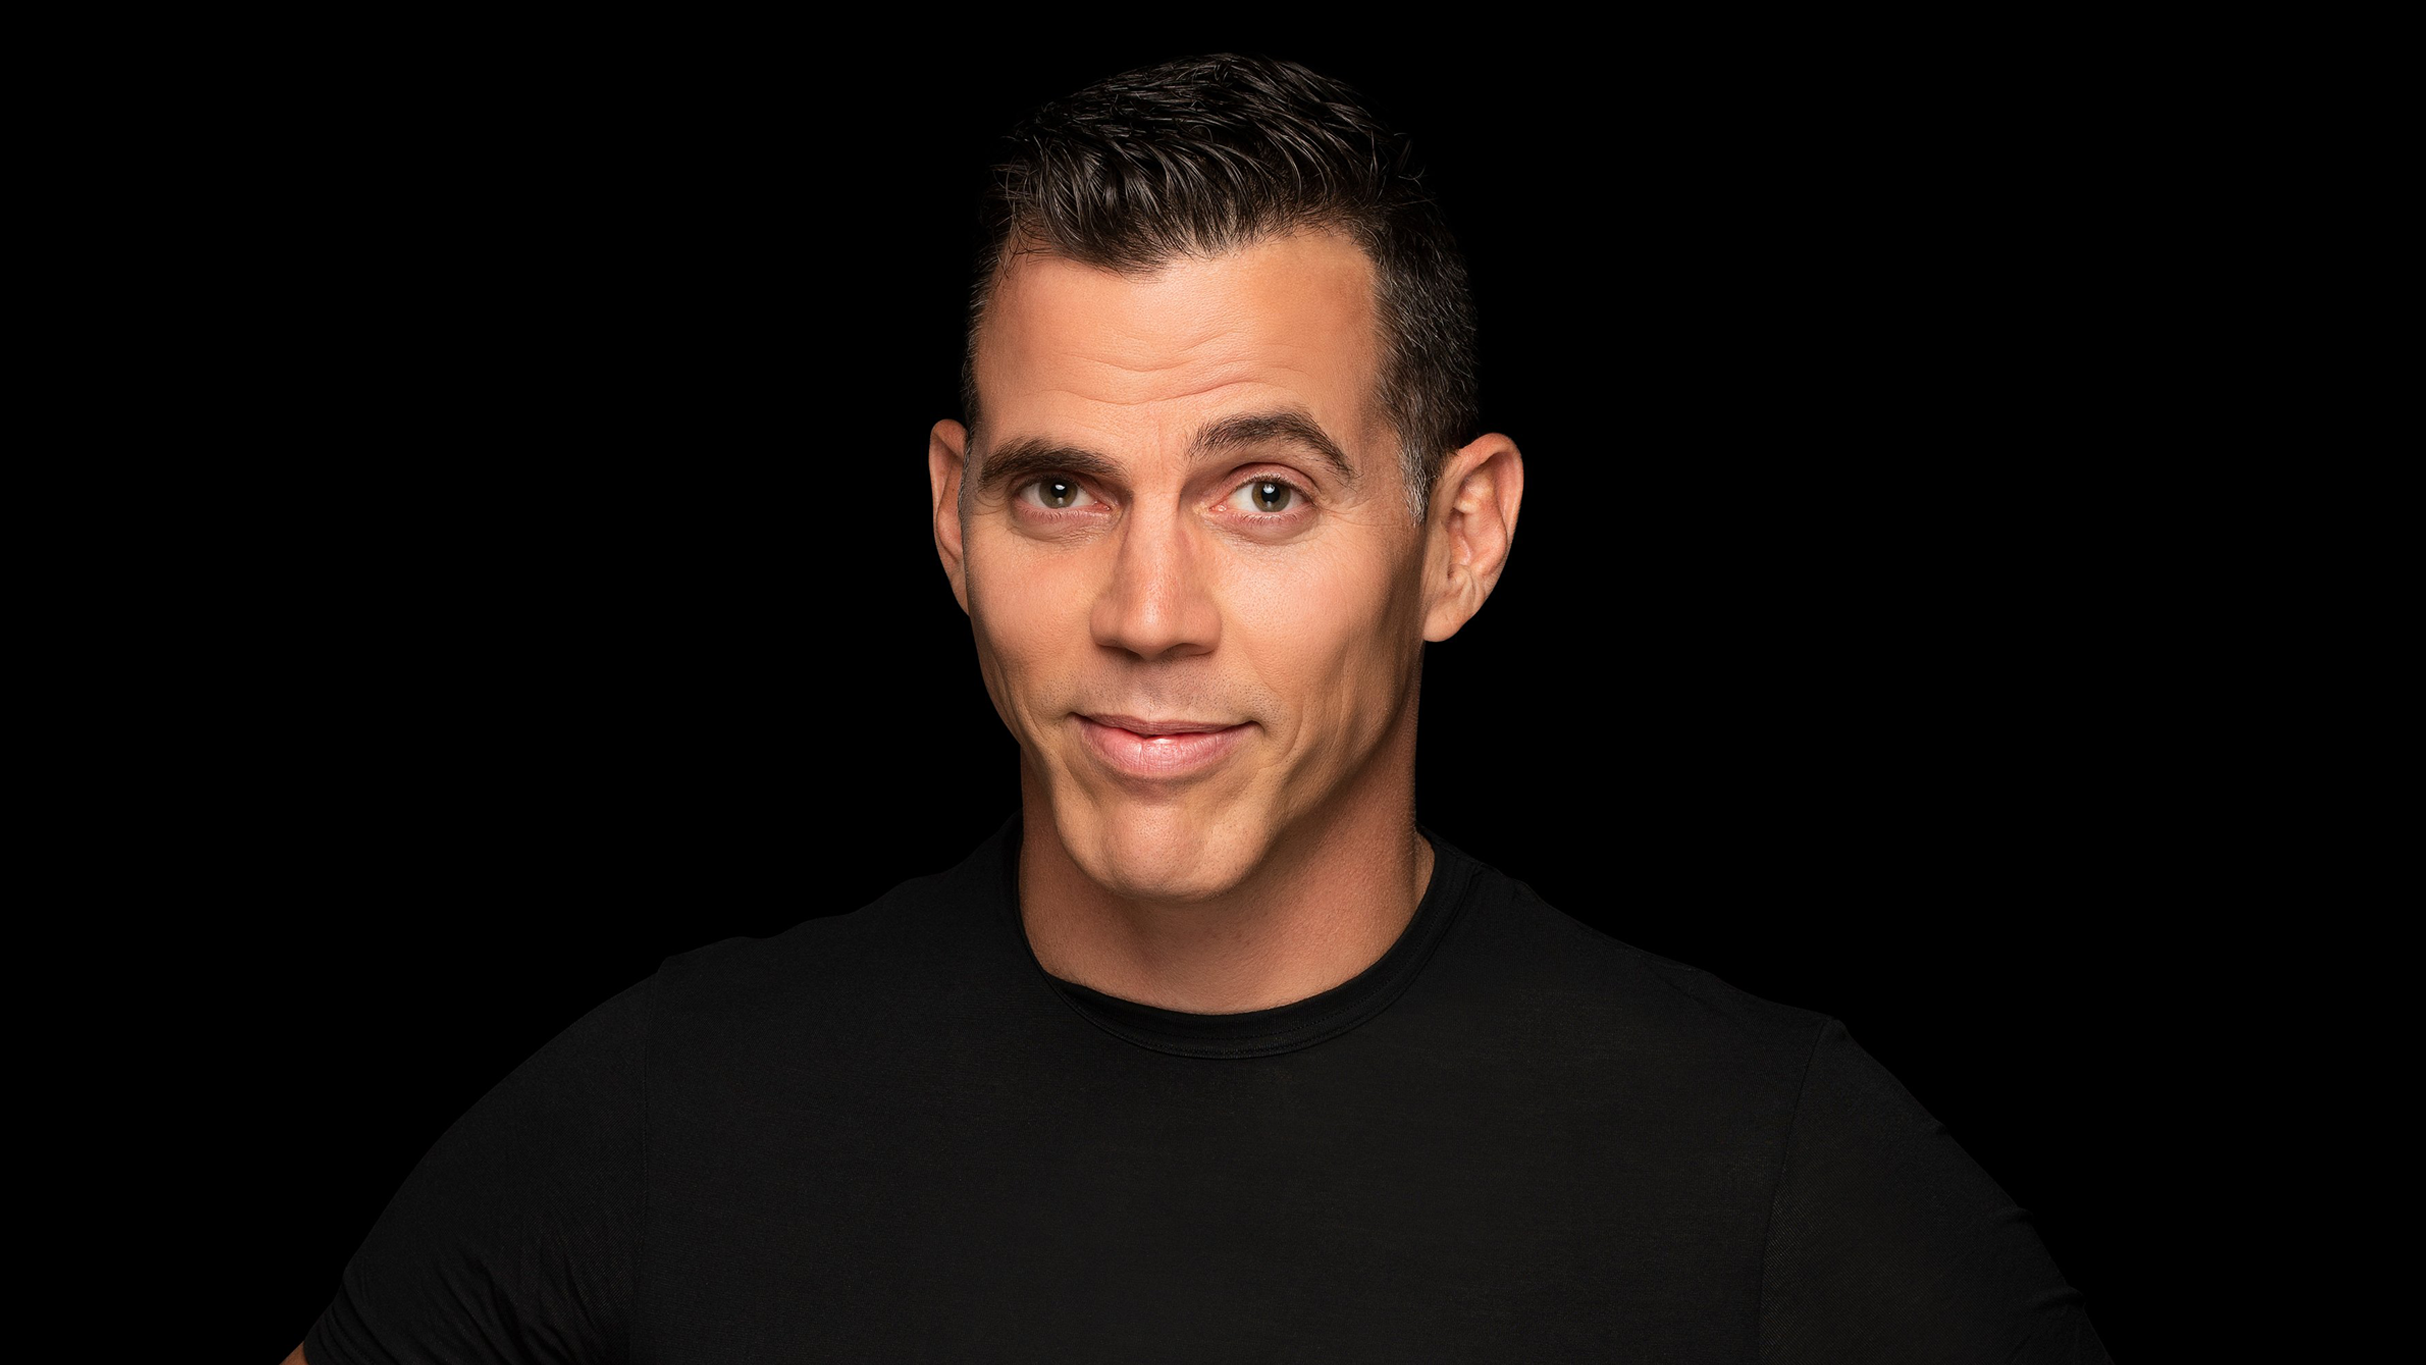 Steve-O pre-sale password for advance tickets in Dubuque